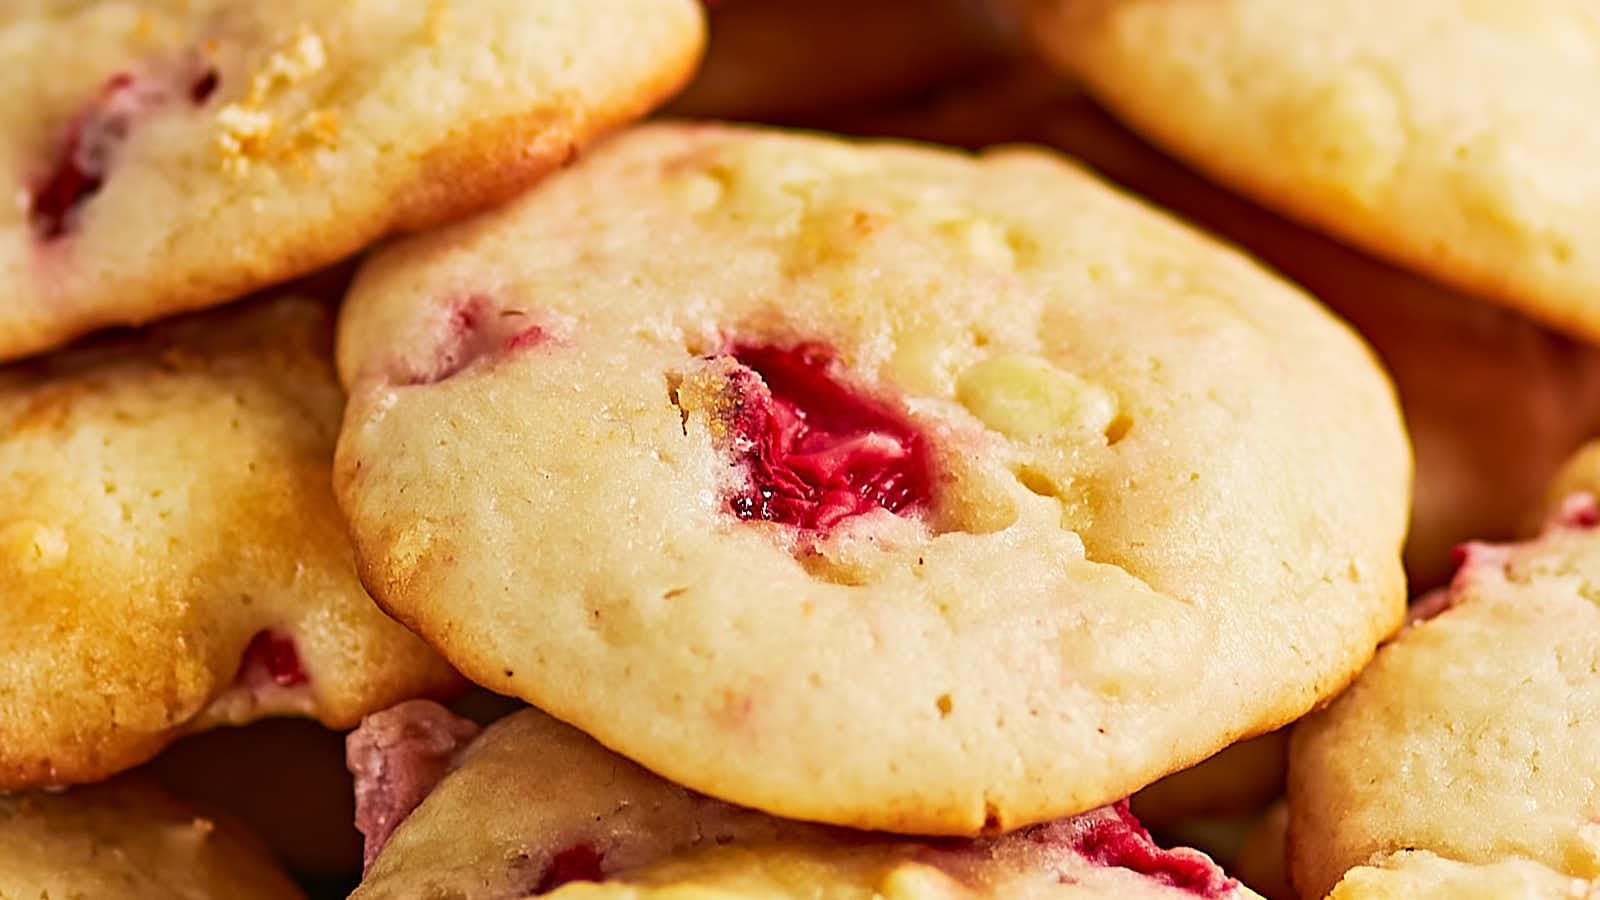 Strawberry Cheesecake Cookies recipe by Cheerful Cook.